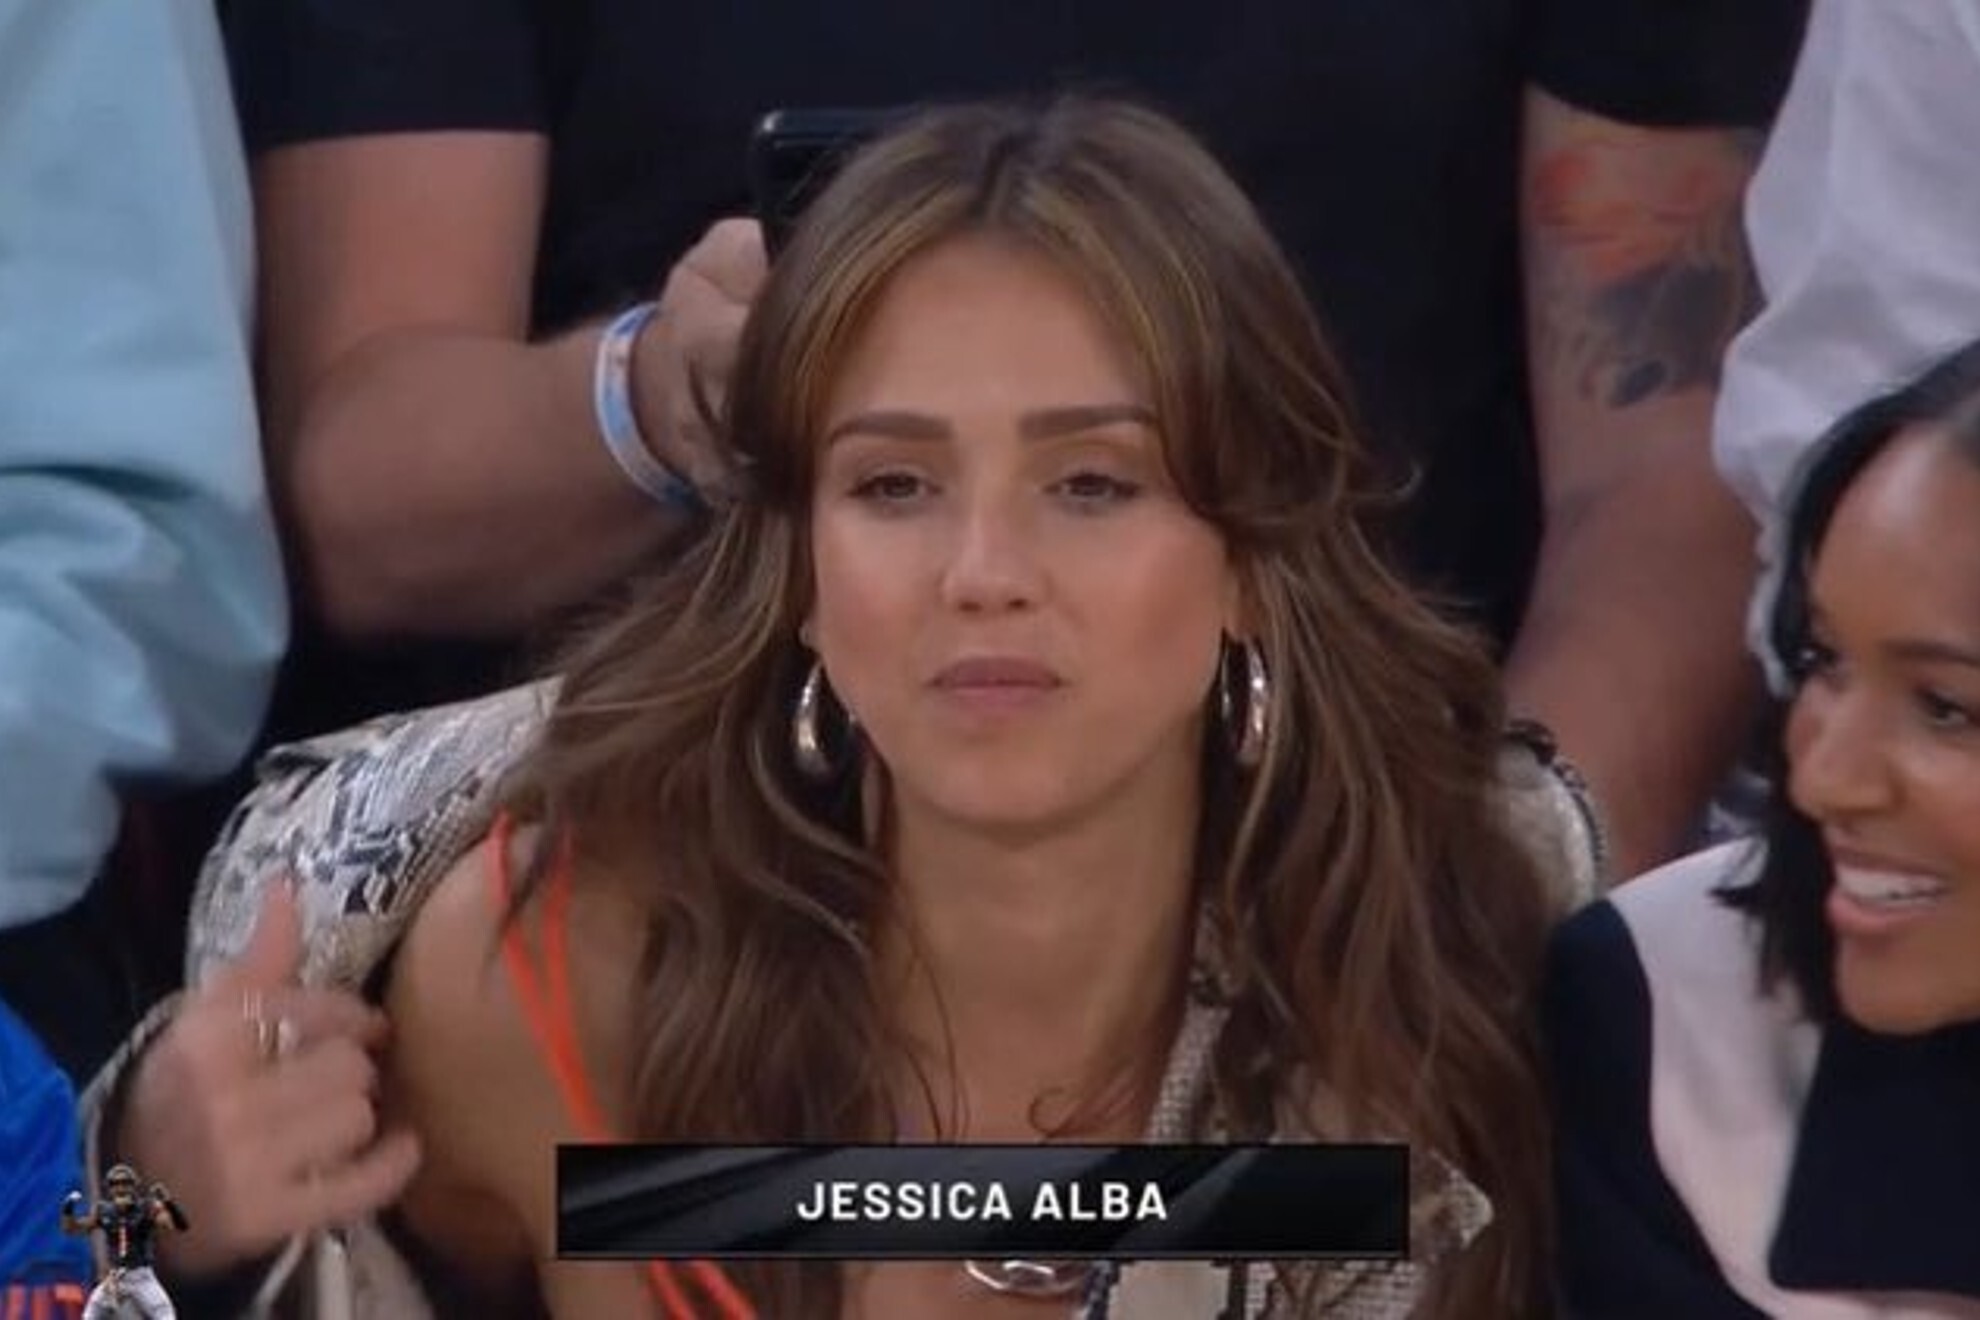 Warriors fan Jessica Alba makes surprise appearance at Knicks vs. Heat Game 2 with comedians Chris Rock, Dave Chappelle and Tracy Morgan